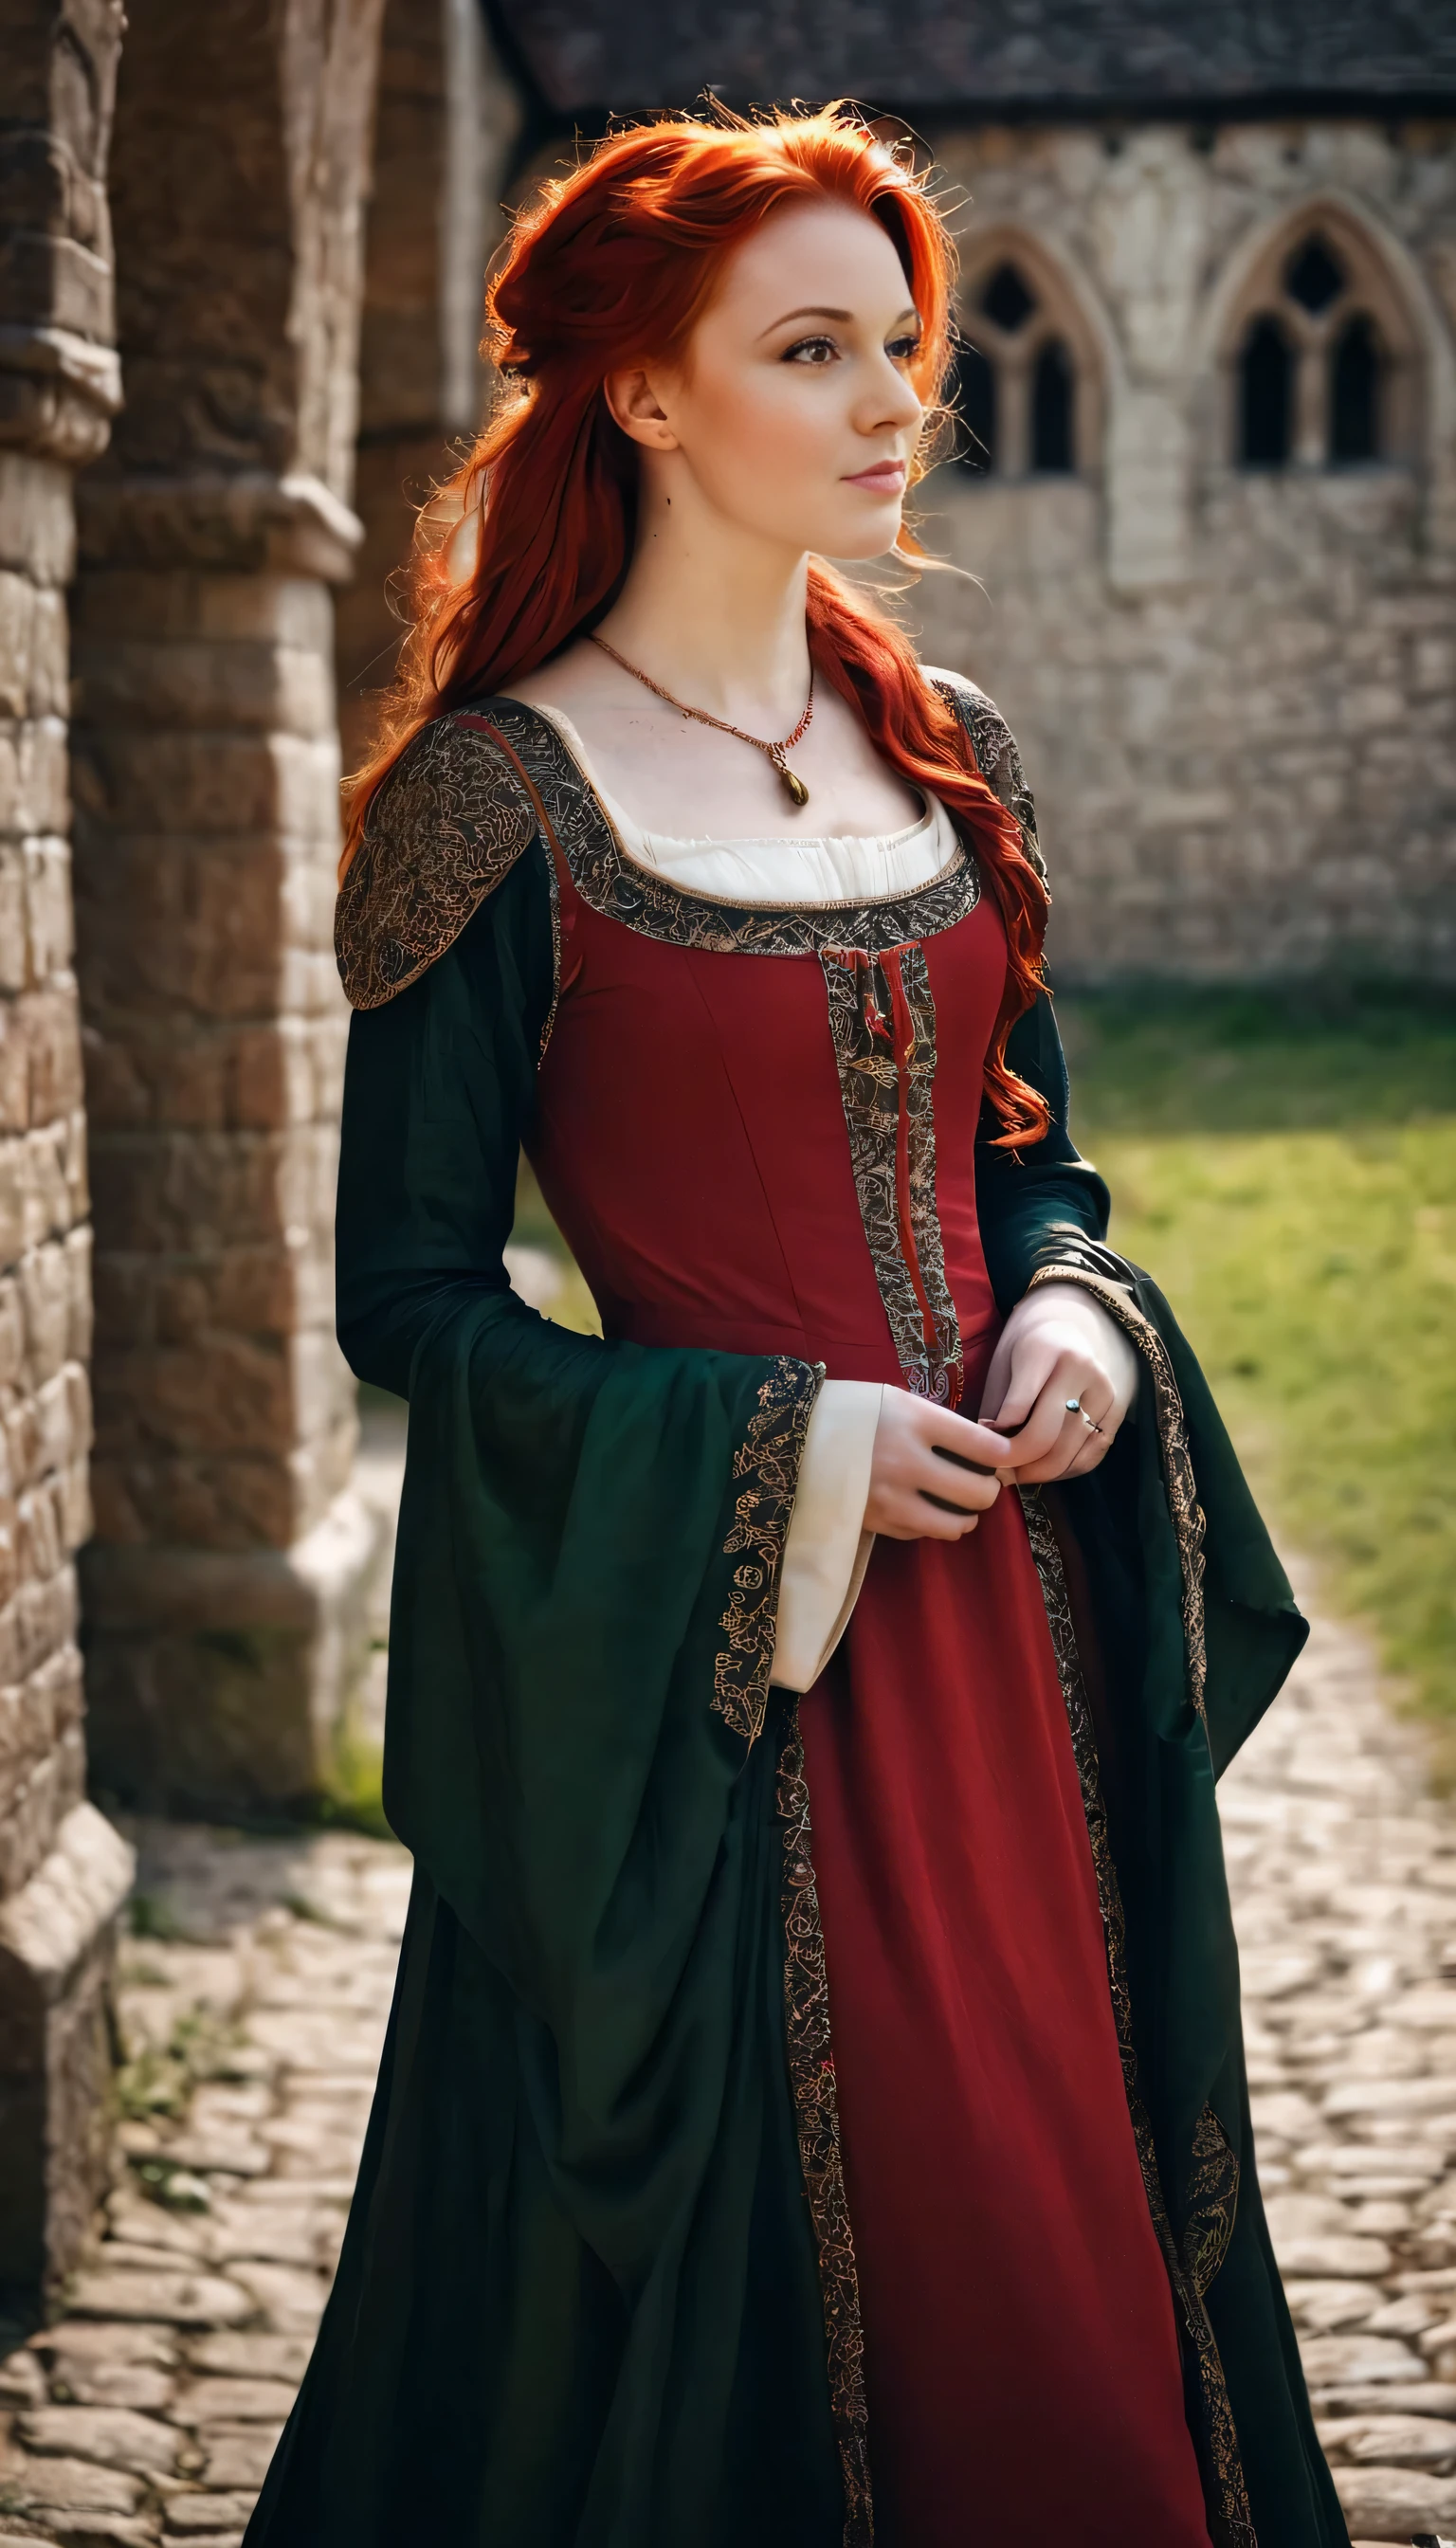 Amazingly beautiful Medieval dressed woman